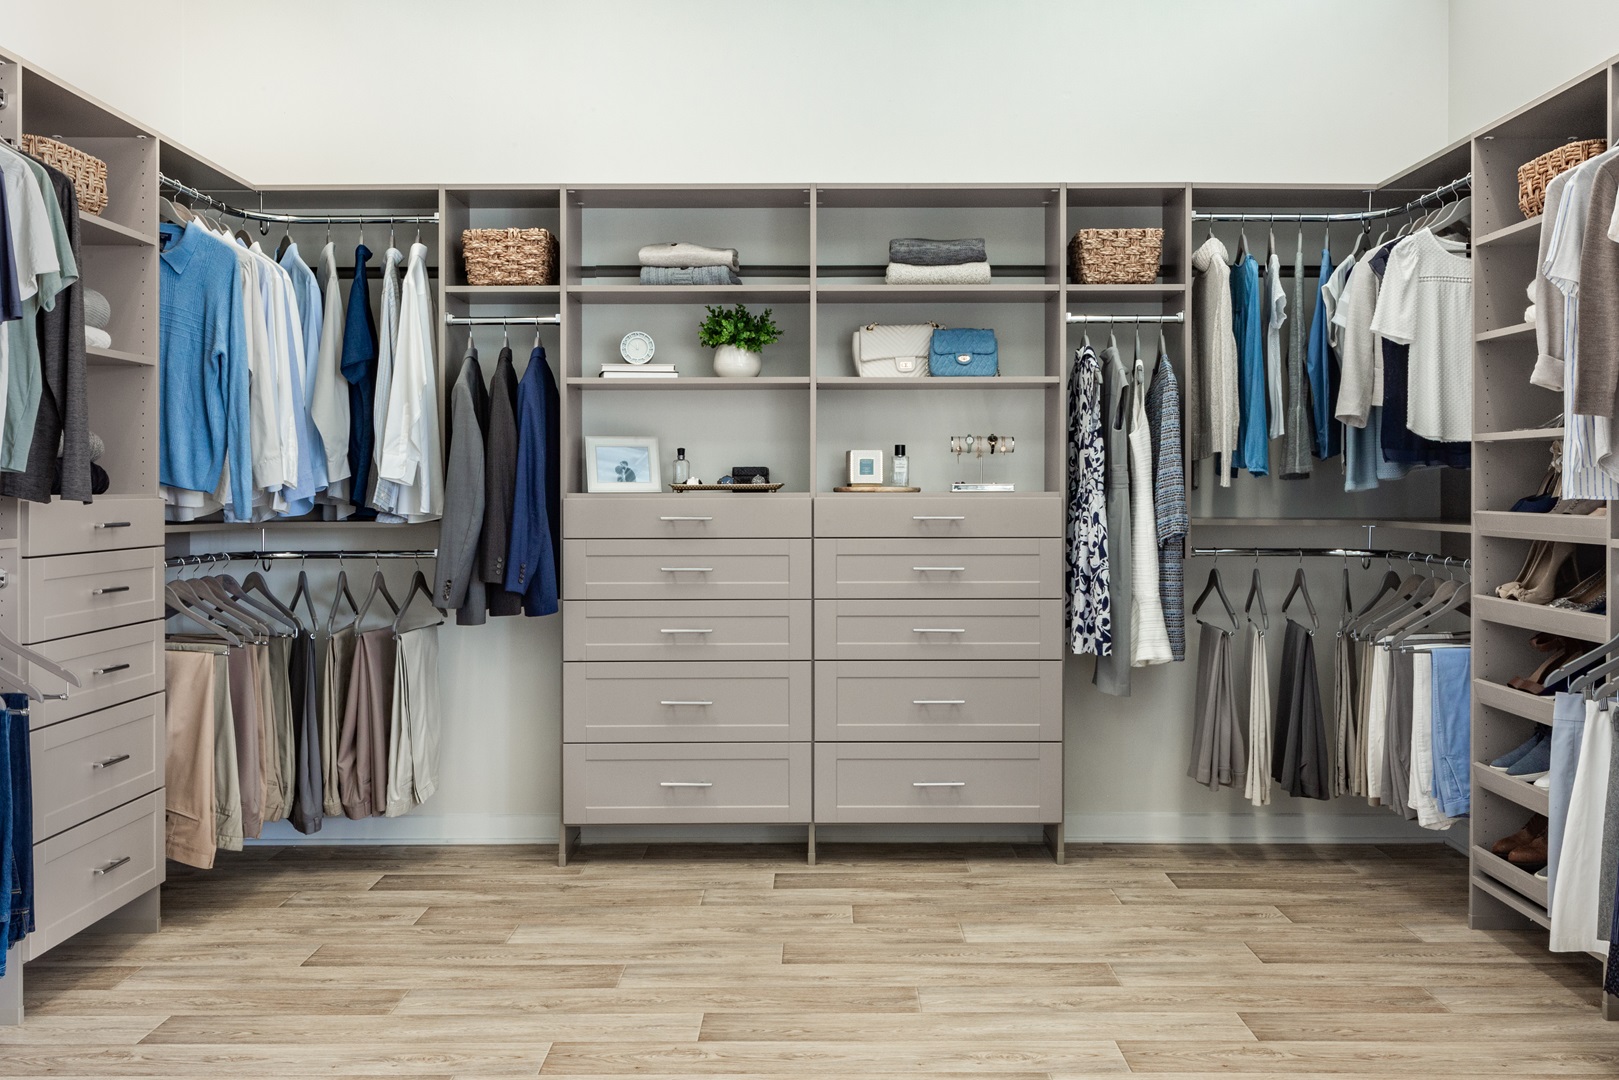 Classica bedroom walk-in closet in century gray propped with clothing, shoes and accessories.